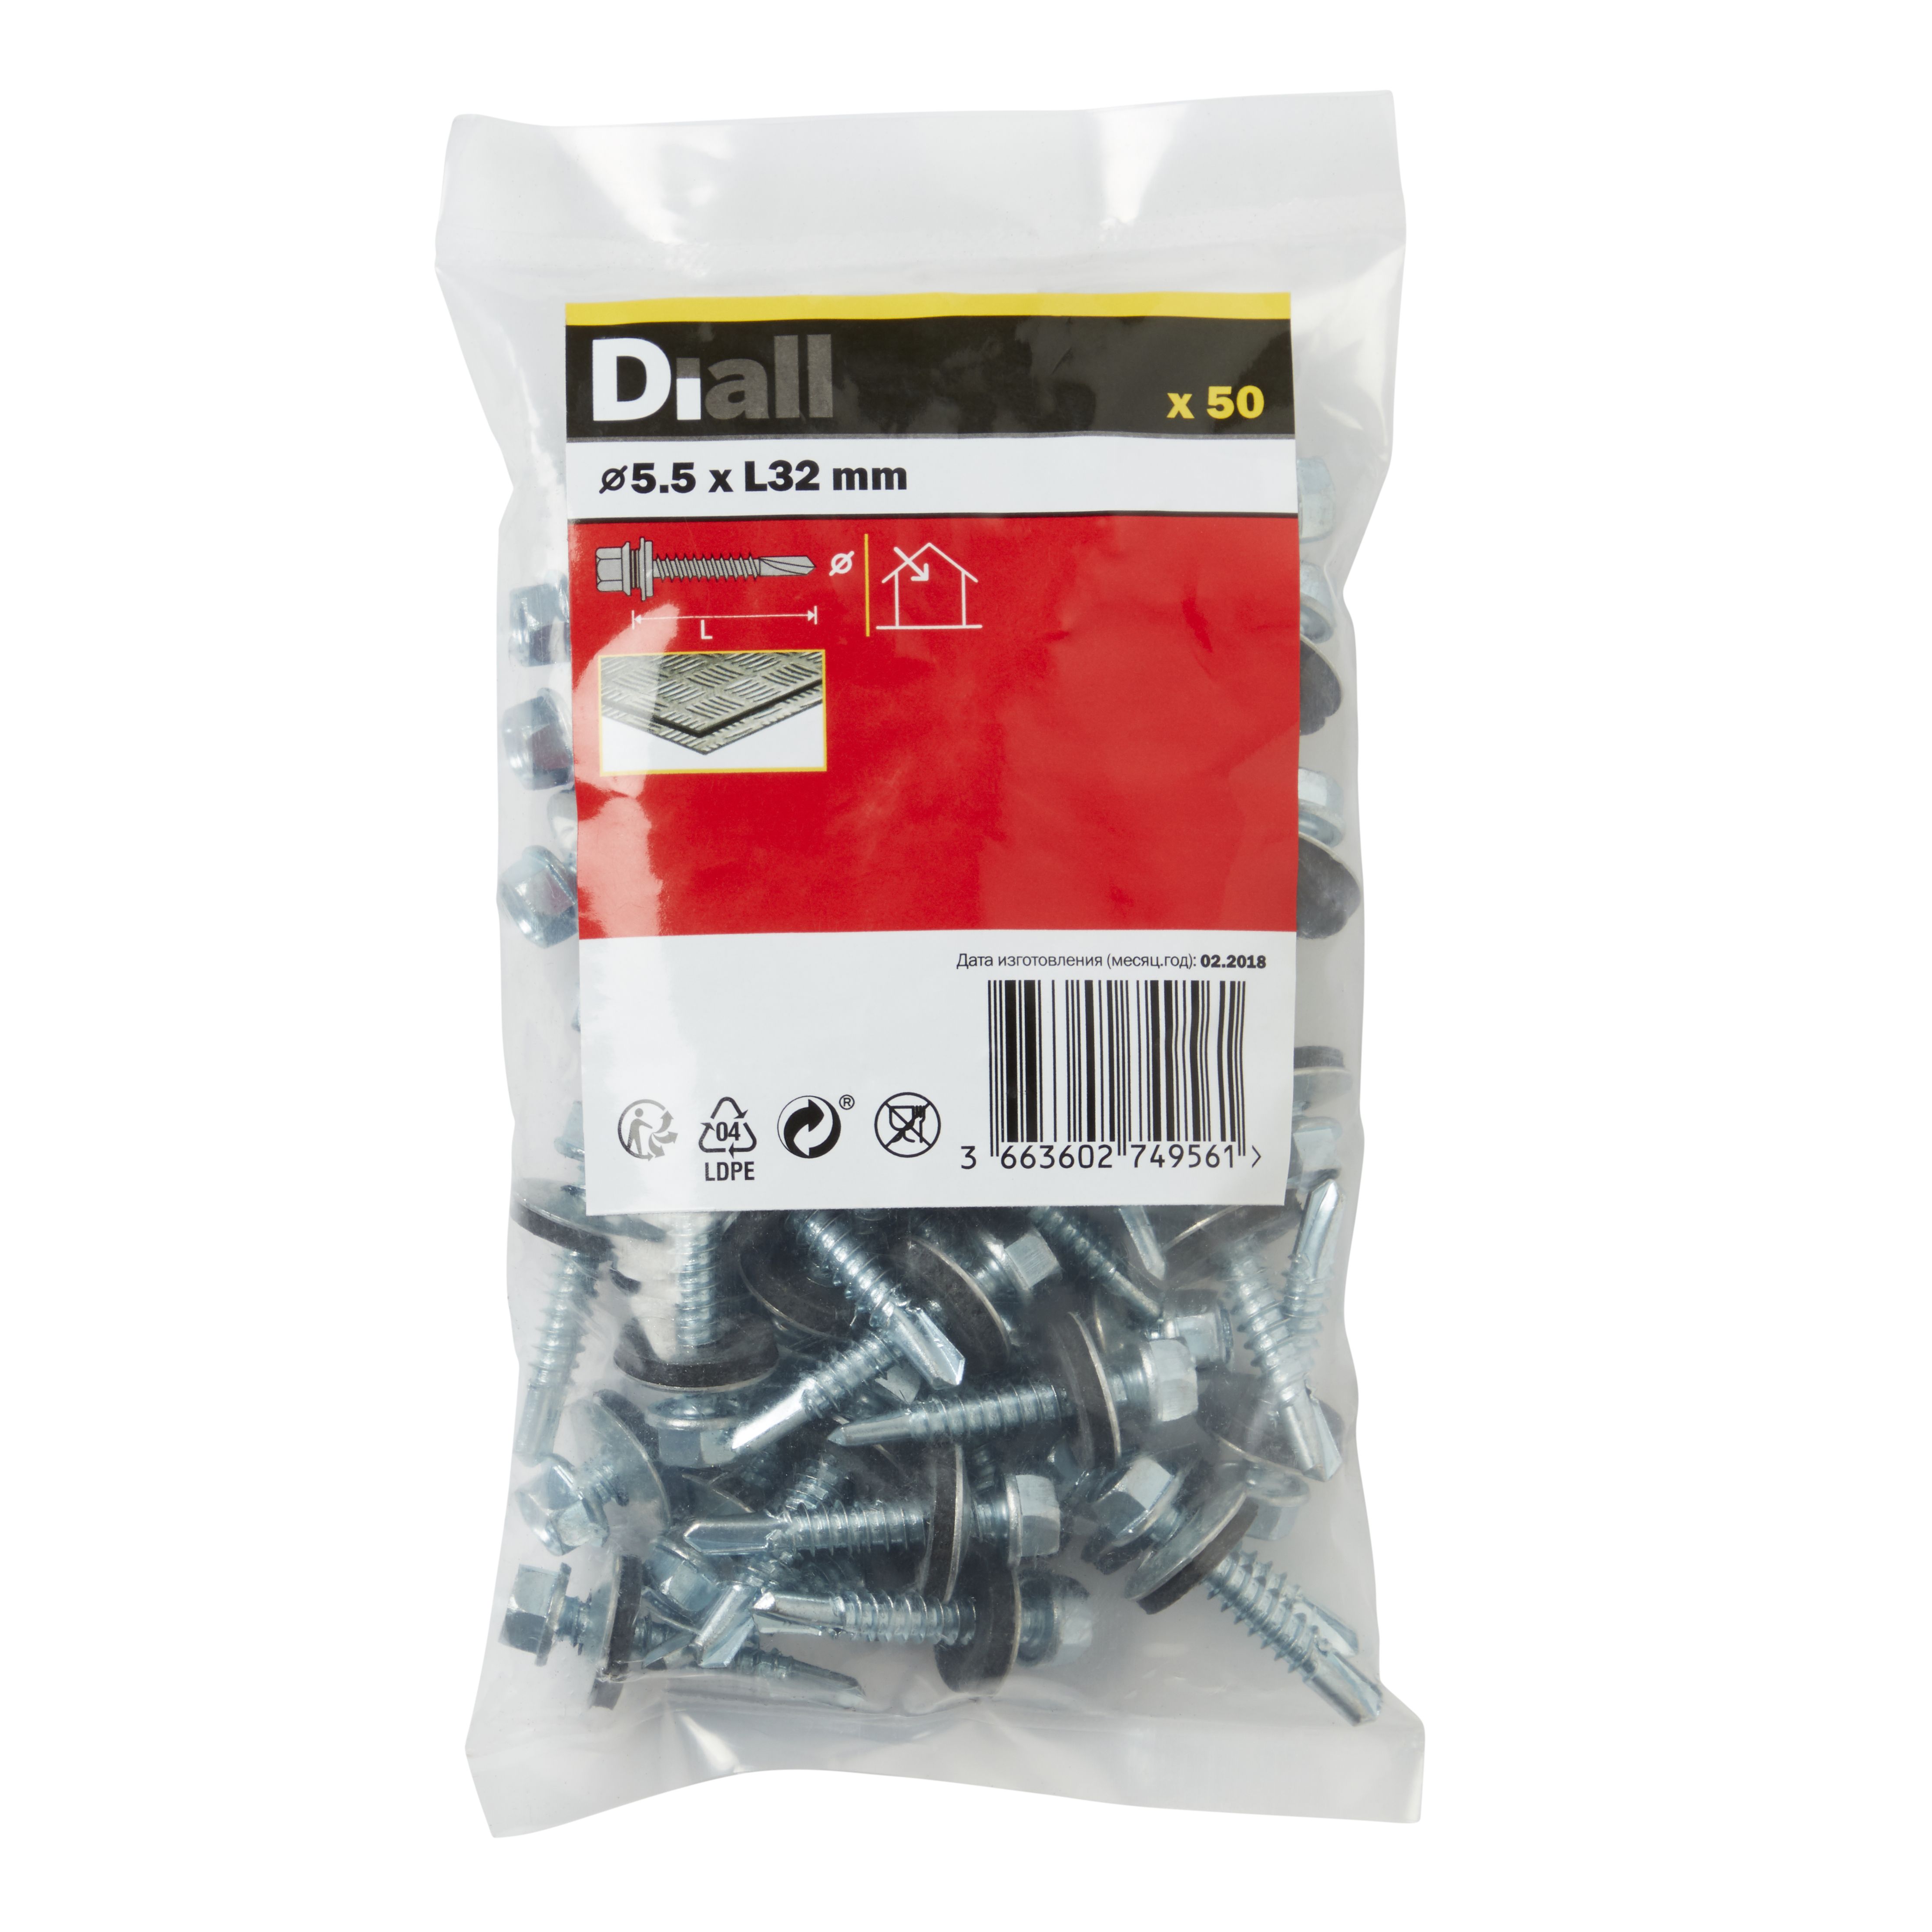 Diall Hex Zinc-plated Carbon steel Roofing screw (Dia)5.5mm (L)32mm, Pack of 50